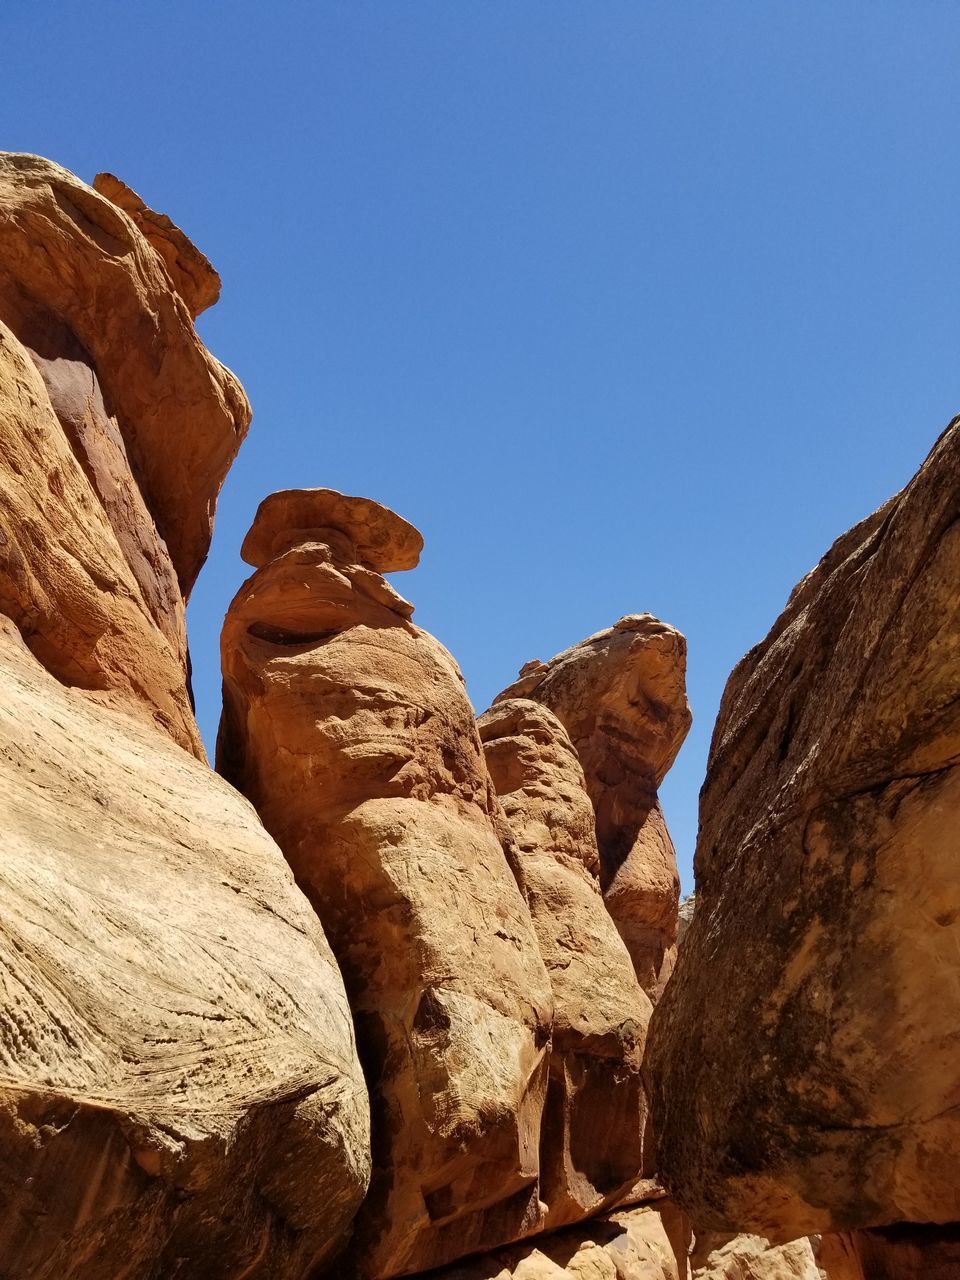 LOW ANGLE VIEW OF ROCK FORMATIONS AGAINST CLEAR BLUE SKY